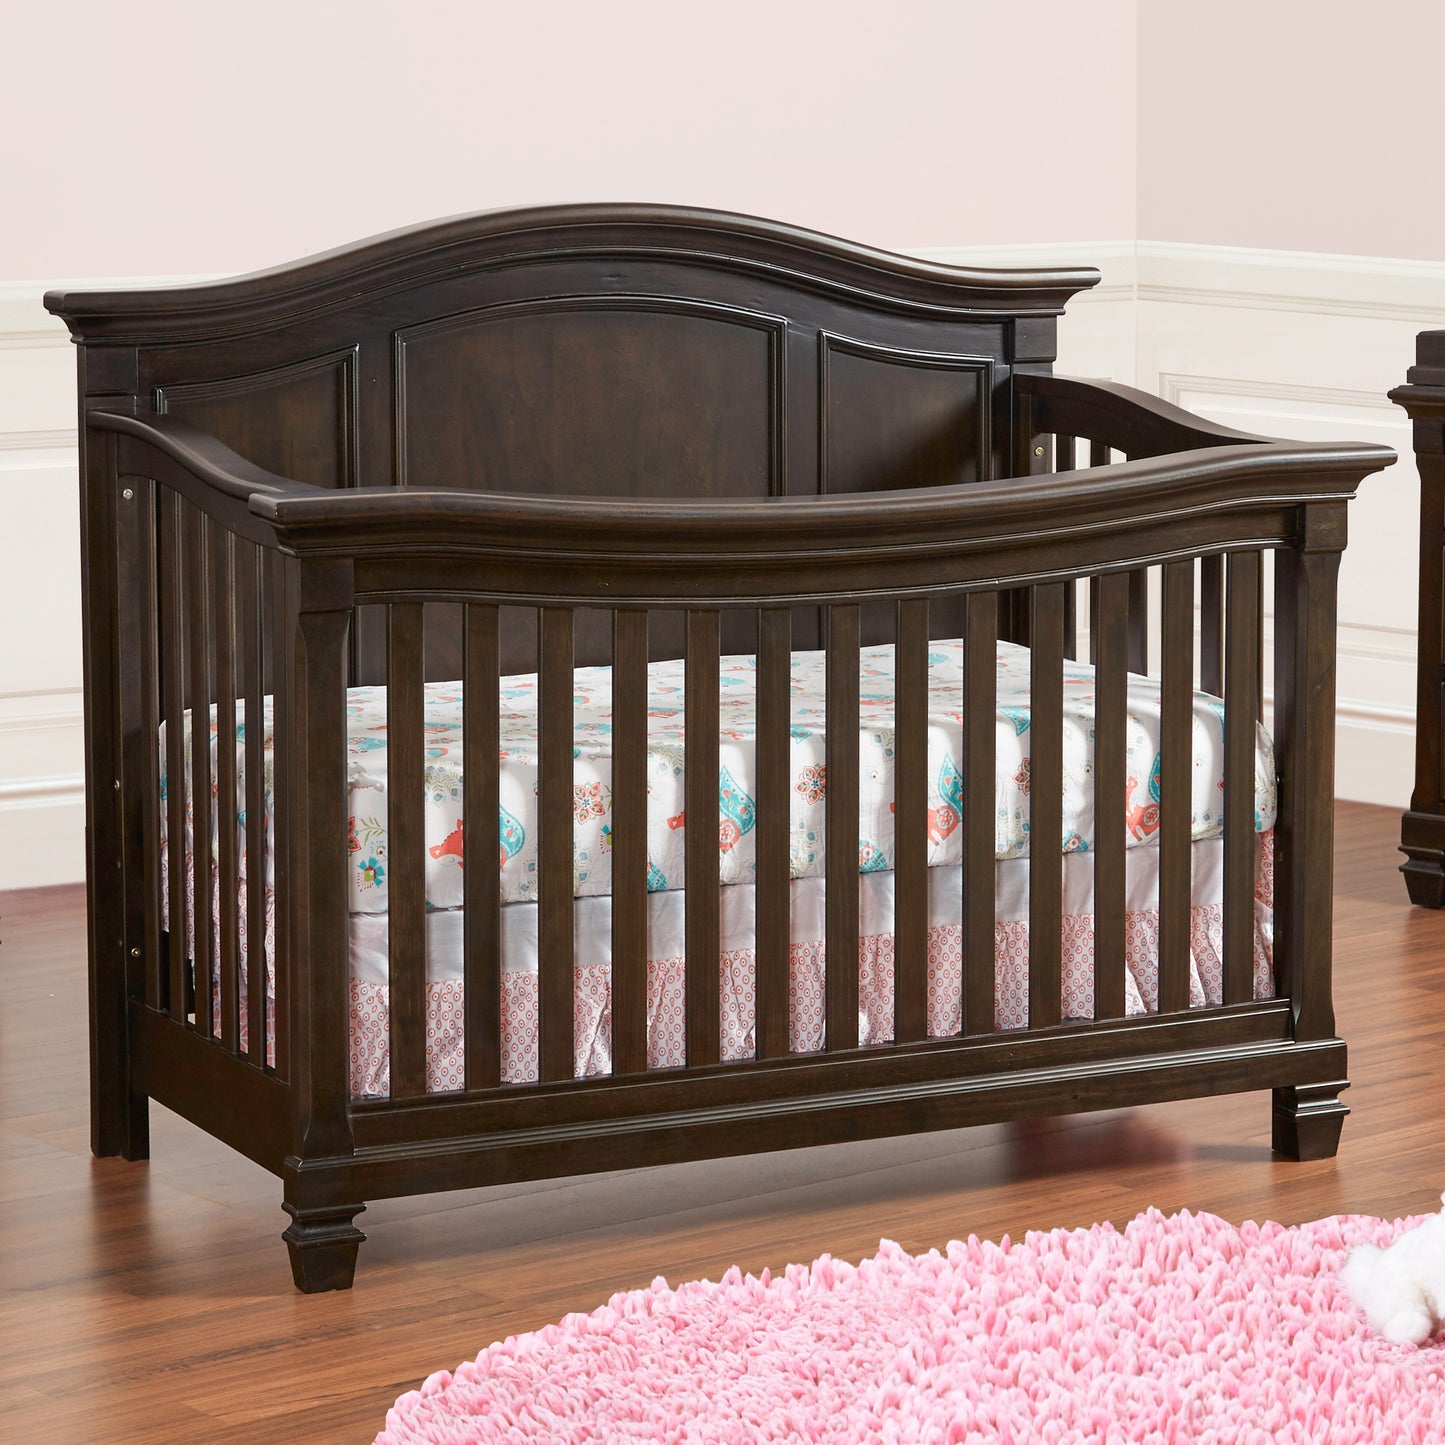 Glendale 4-in-1 Convertible Crib Charcoal Brown